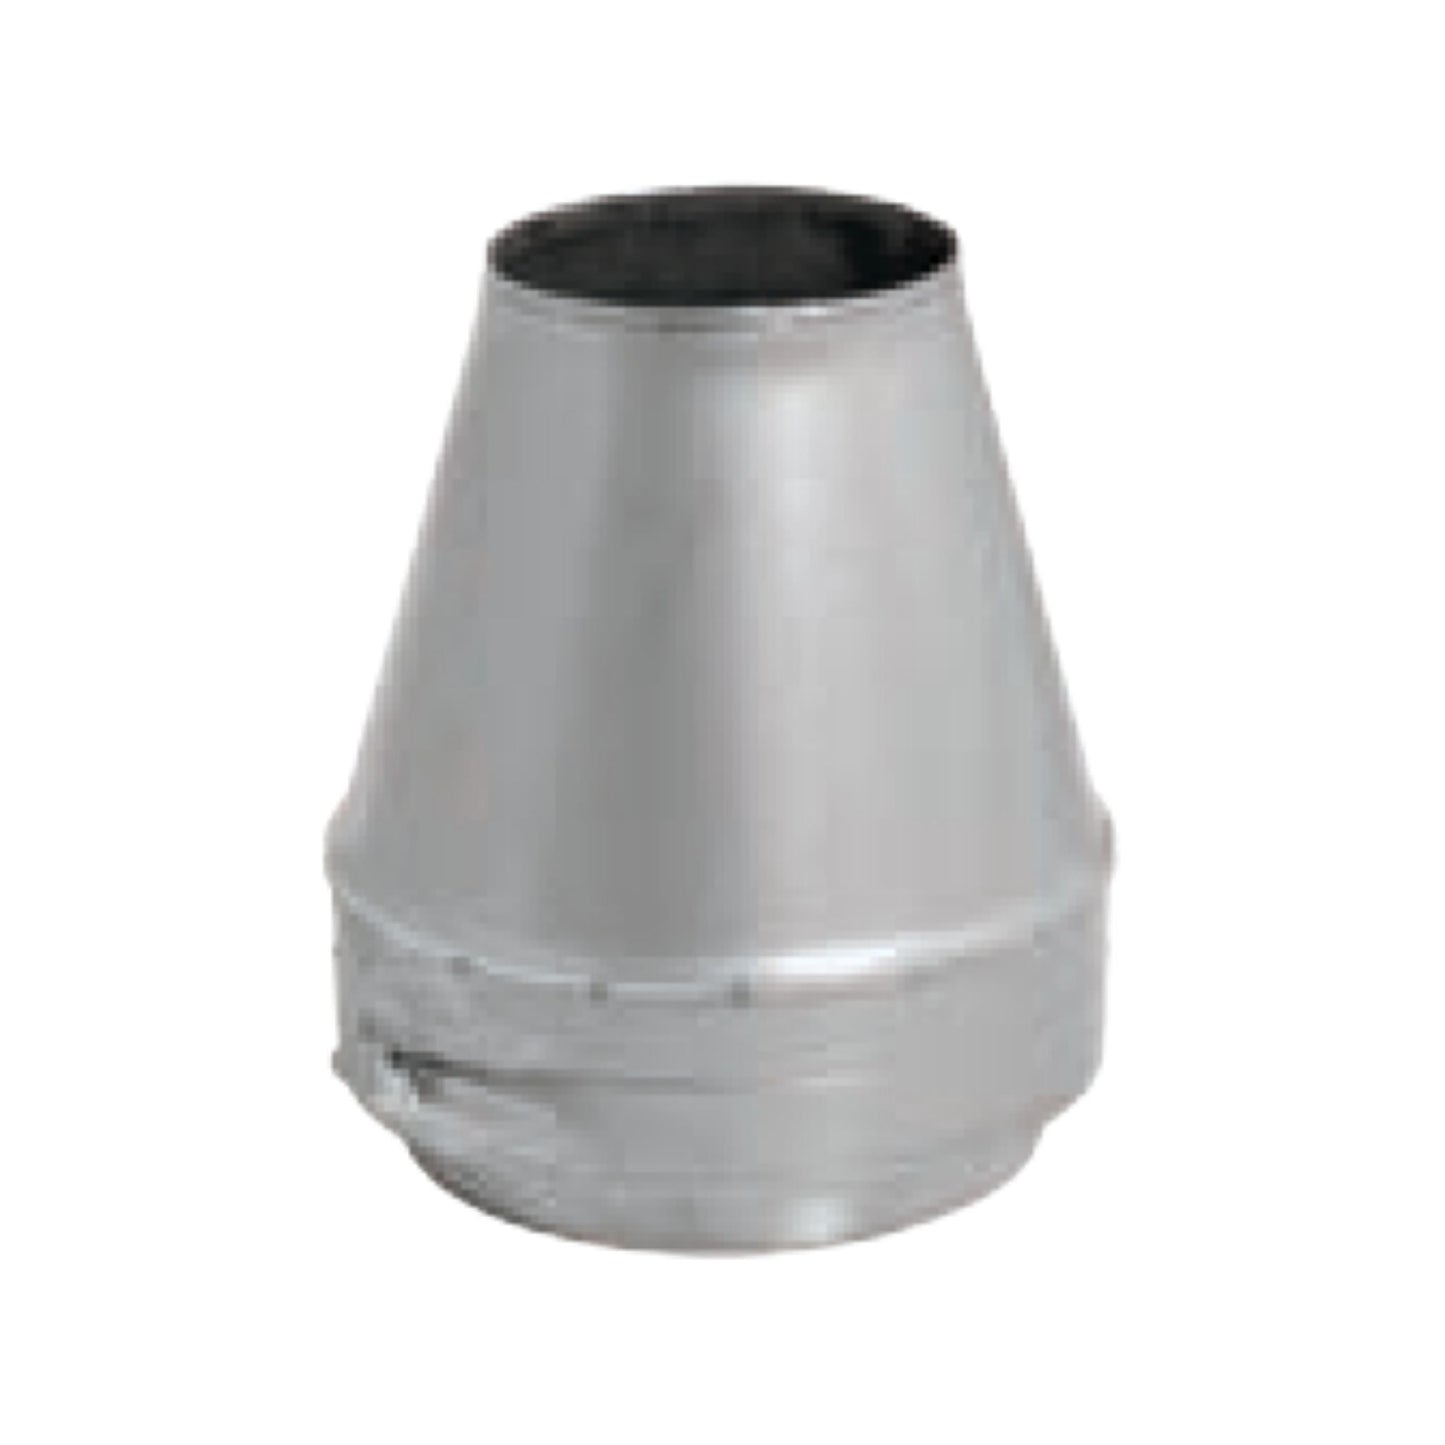 DuraVent FasNSeal W2 6" x 5" 29-4C Stainless Steel Double Wall Termination Cone